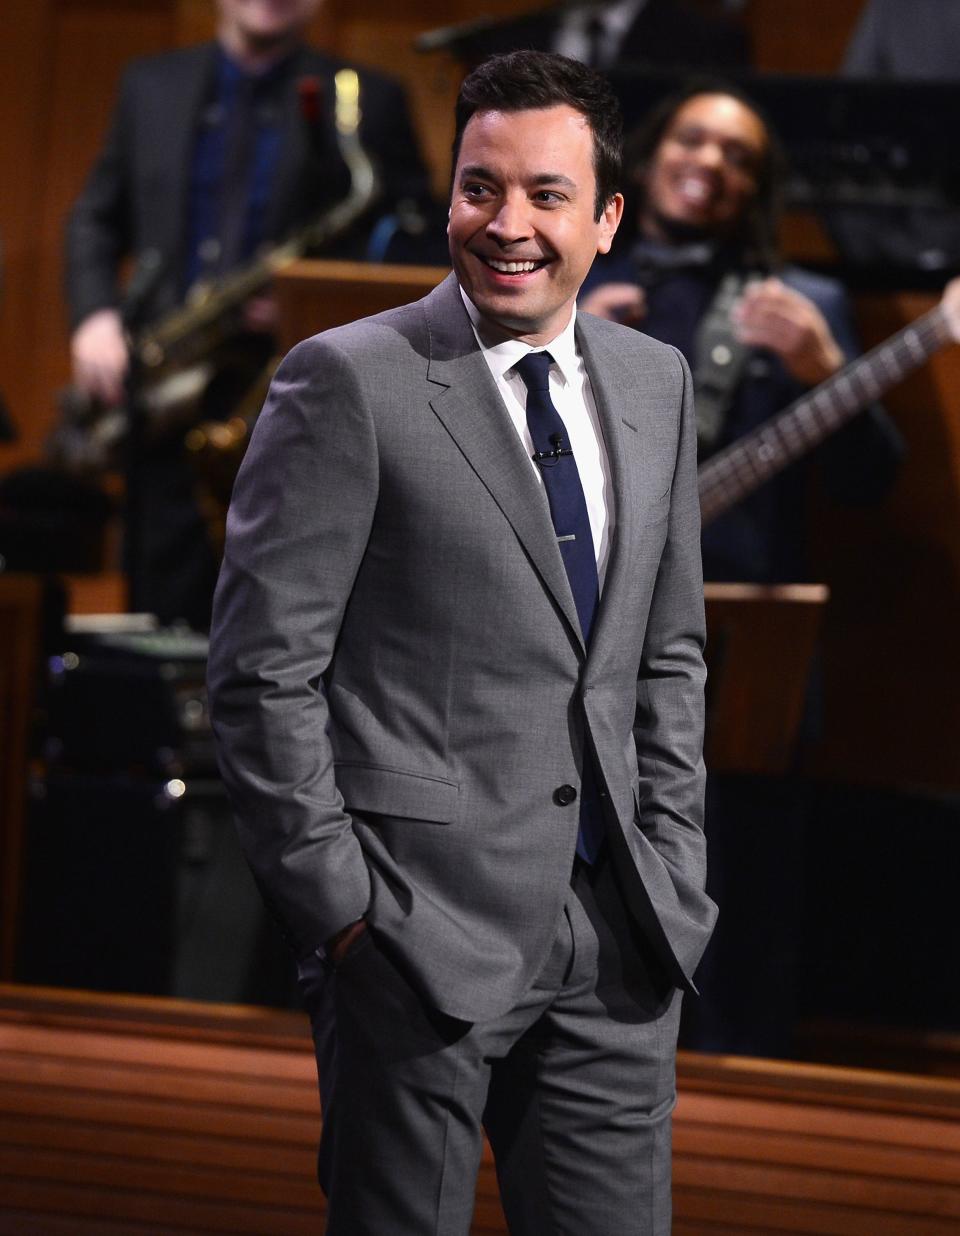 Jimmy Fallon appears during his "The Tonight Show"